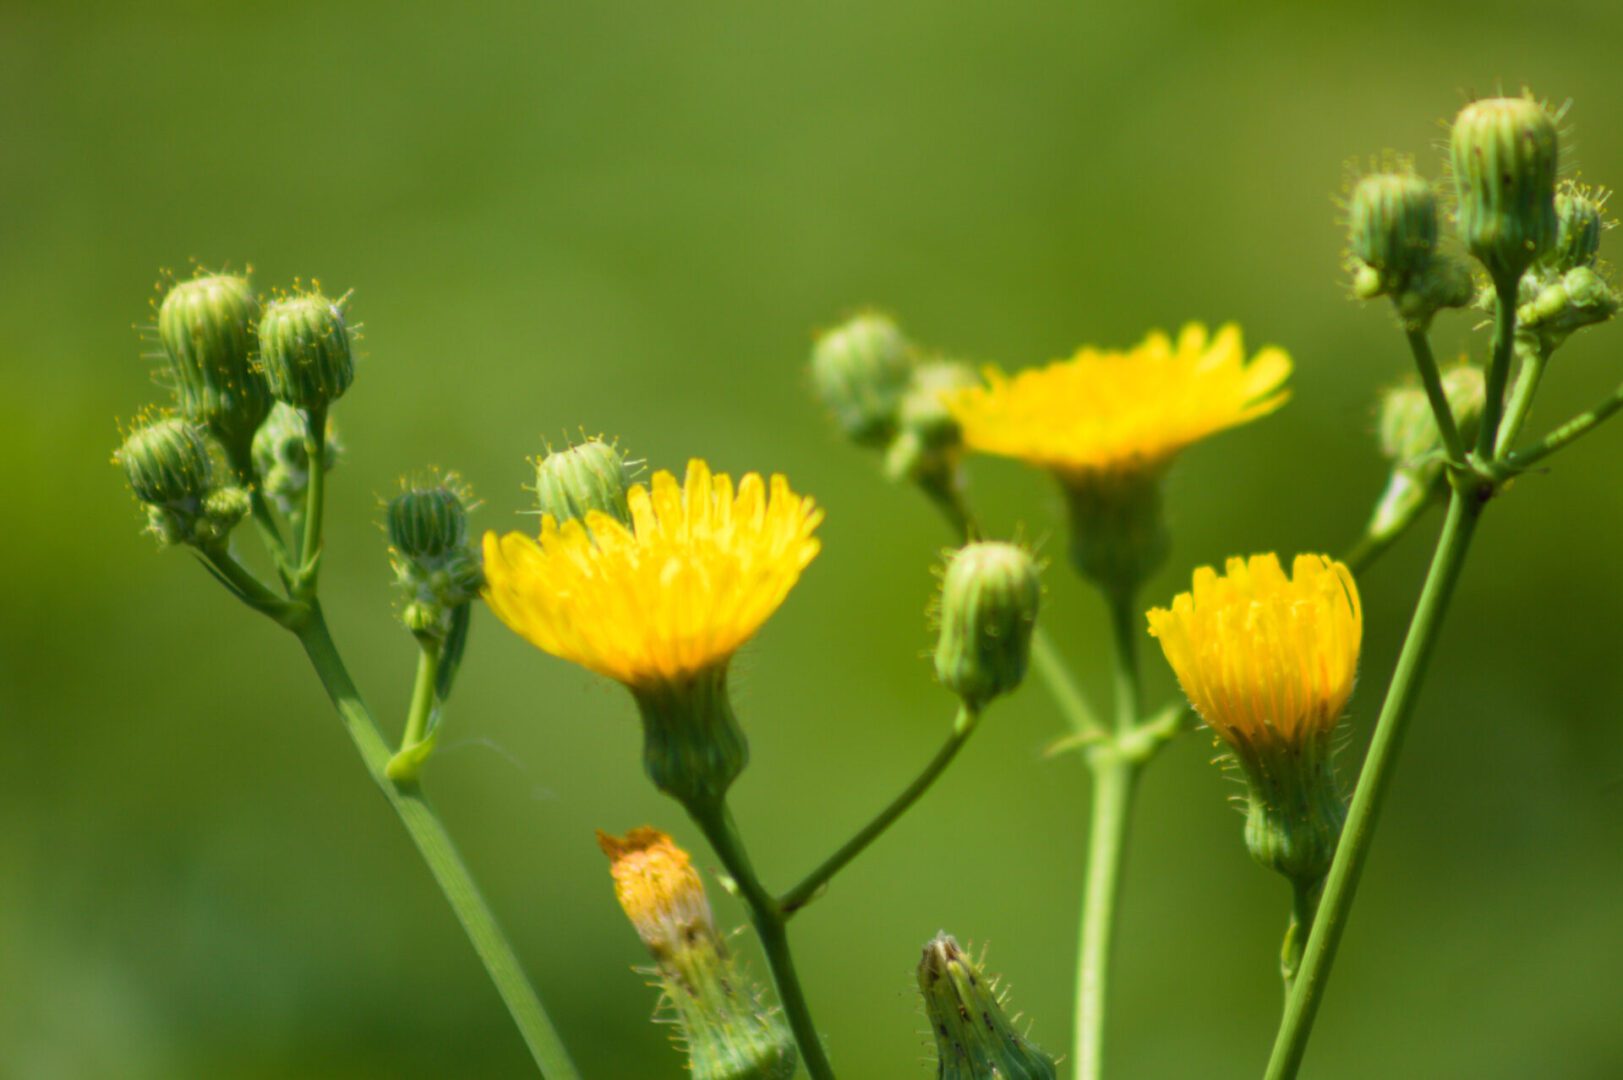 A close up of some yellow flowers with green stems